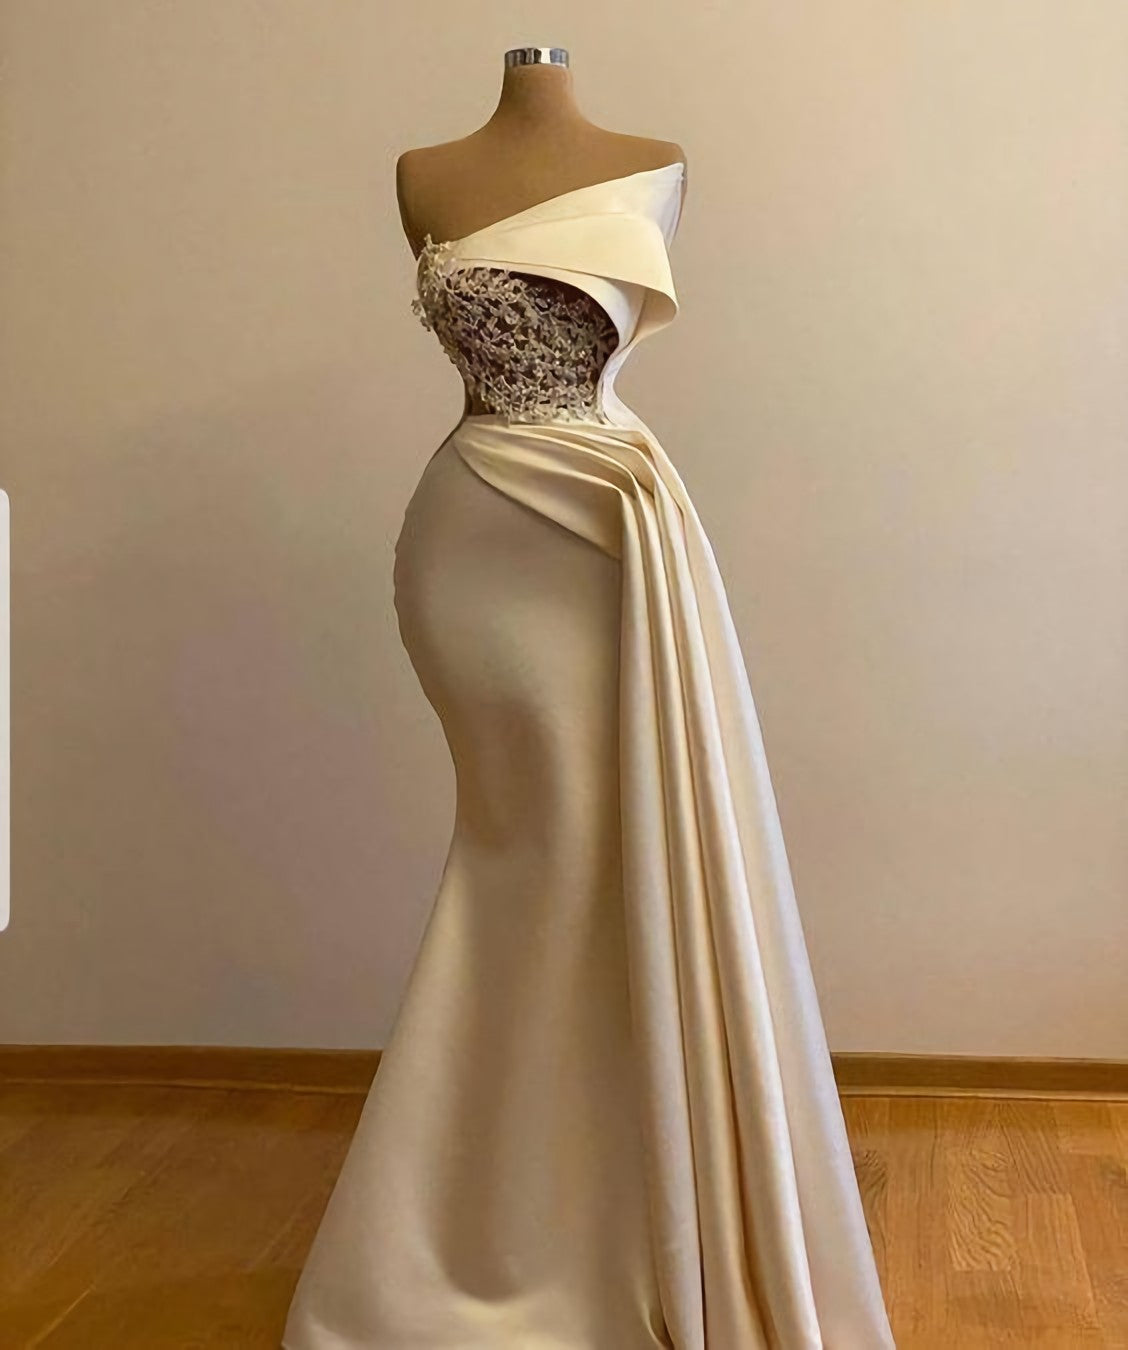 Wedding Dresses For Maids, Off Shoulder Ivory Prom Dress, With Cape Wedding Gown Bridal Dress, Long Ivory Engagement Dress, African Clothing For Women Prom Dress